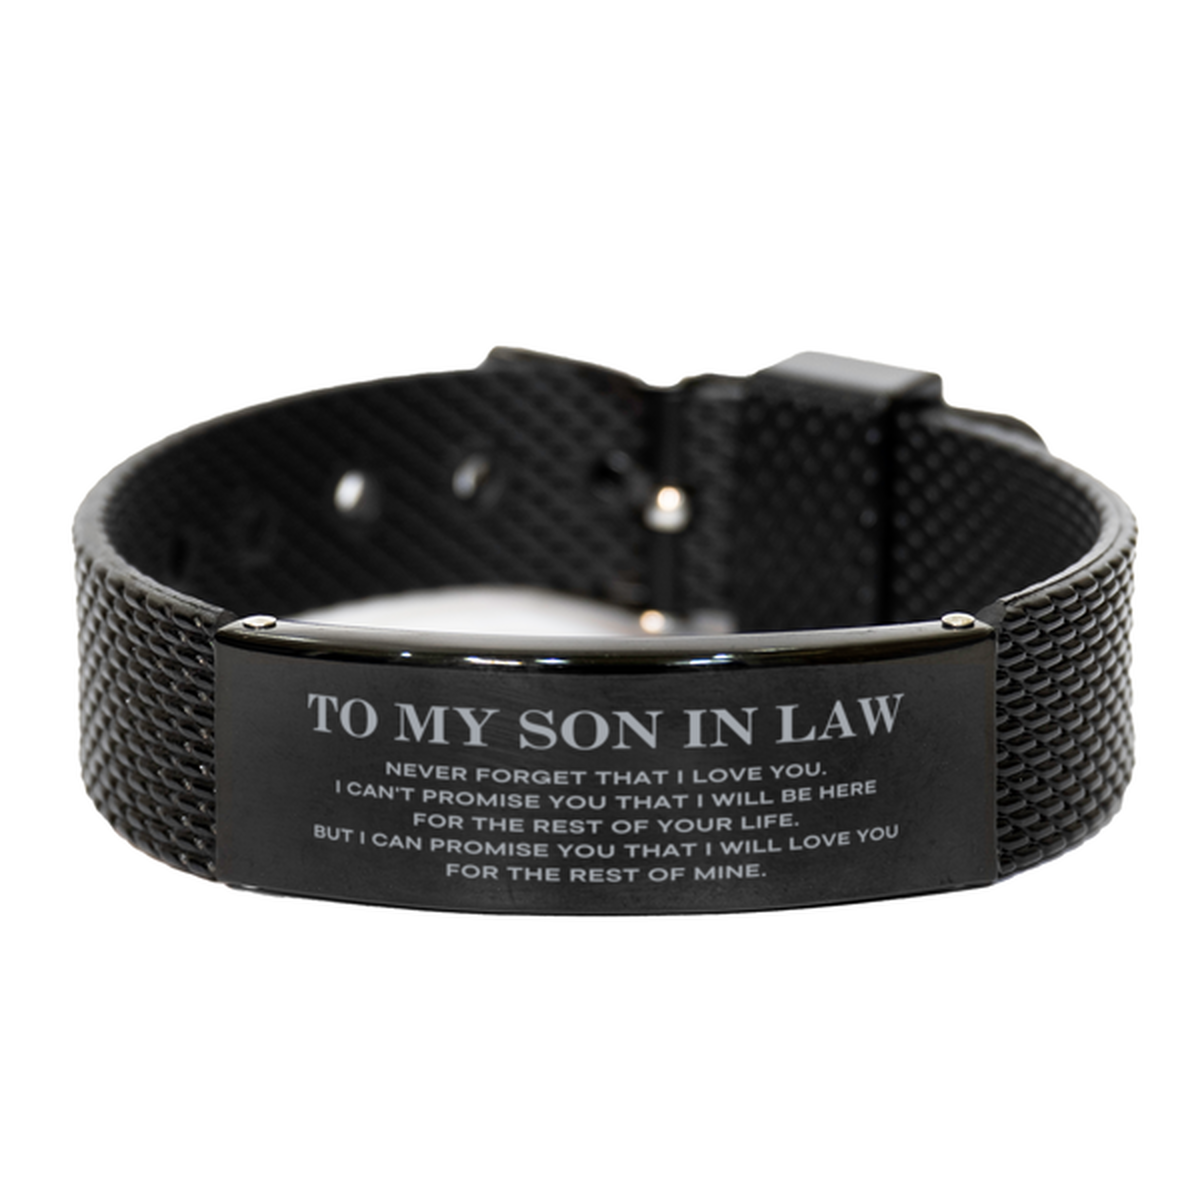 To My Son In Law Gifts, I will love you for the rest of mine, Love Son In Law Bracelet, Birthday Christmas Unique Black Shark Mesh Bracelet For Son In Law